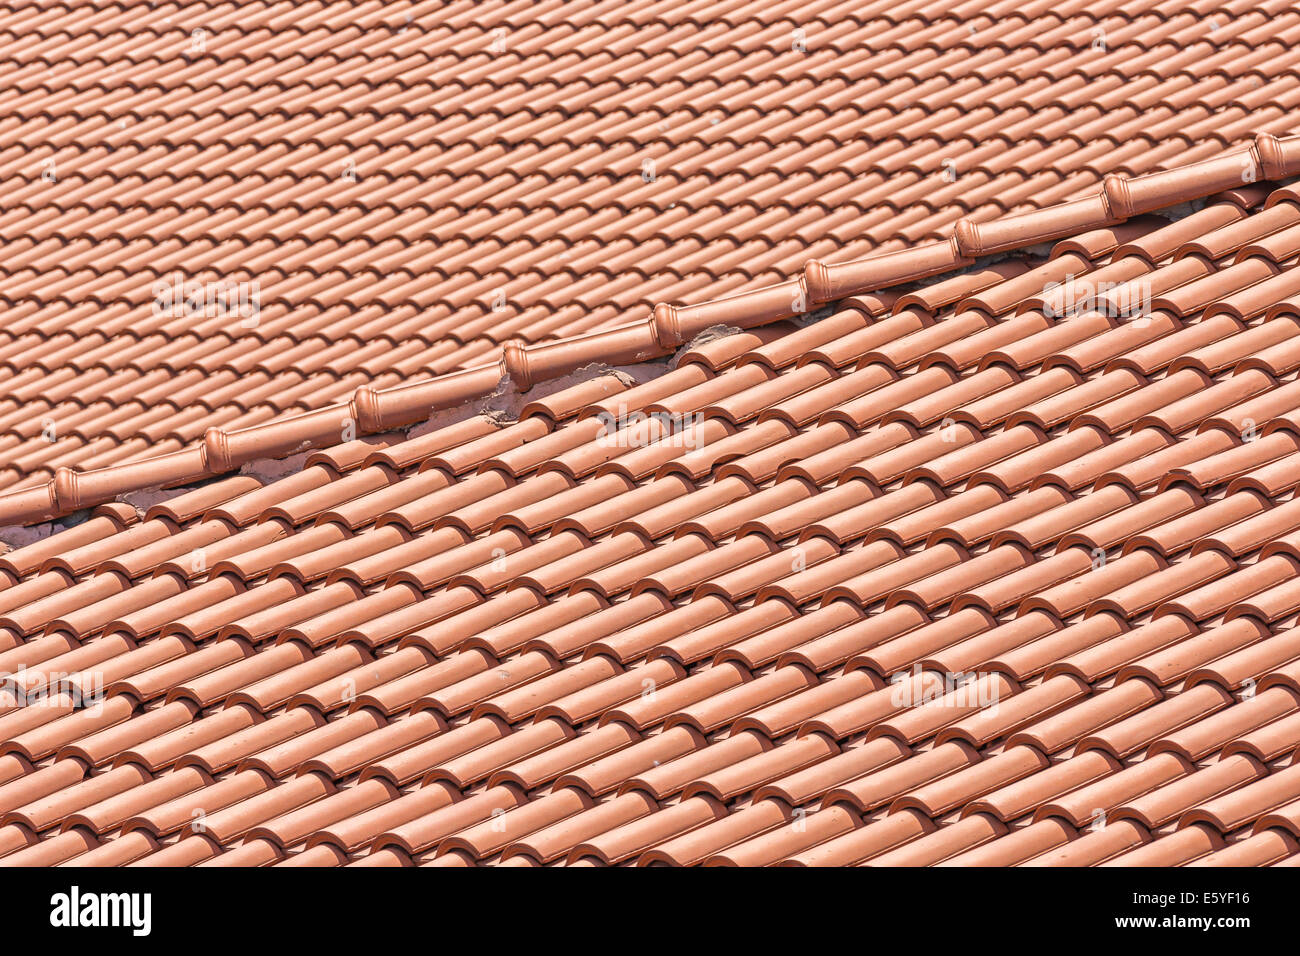 Italian Roof Tiles High Resolution Stock Photography and Images - Alamy